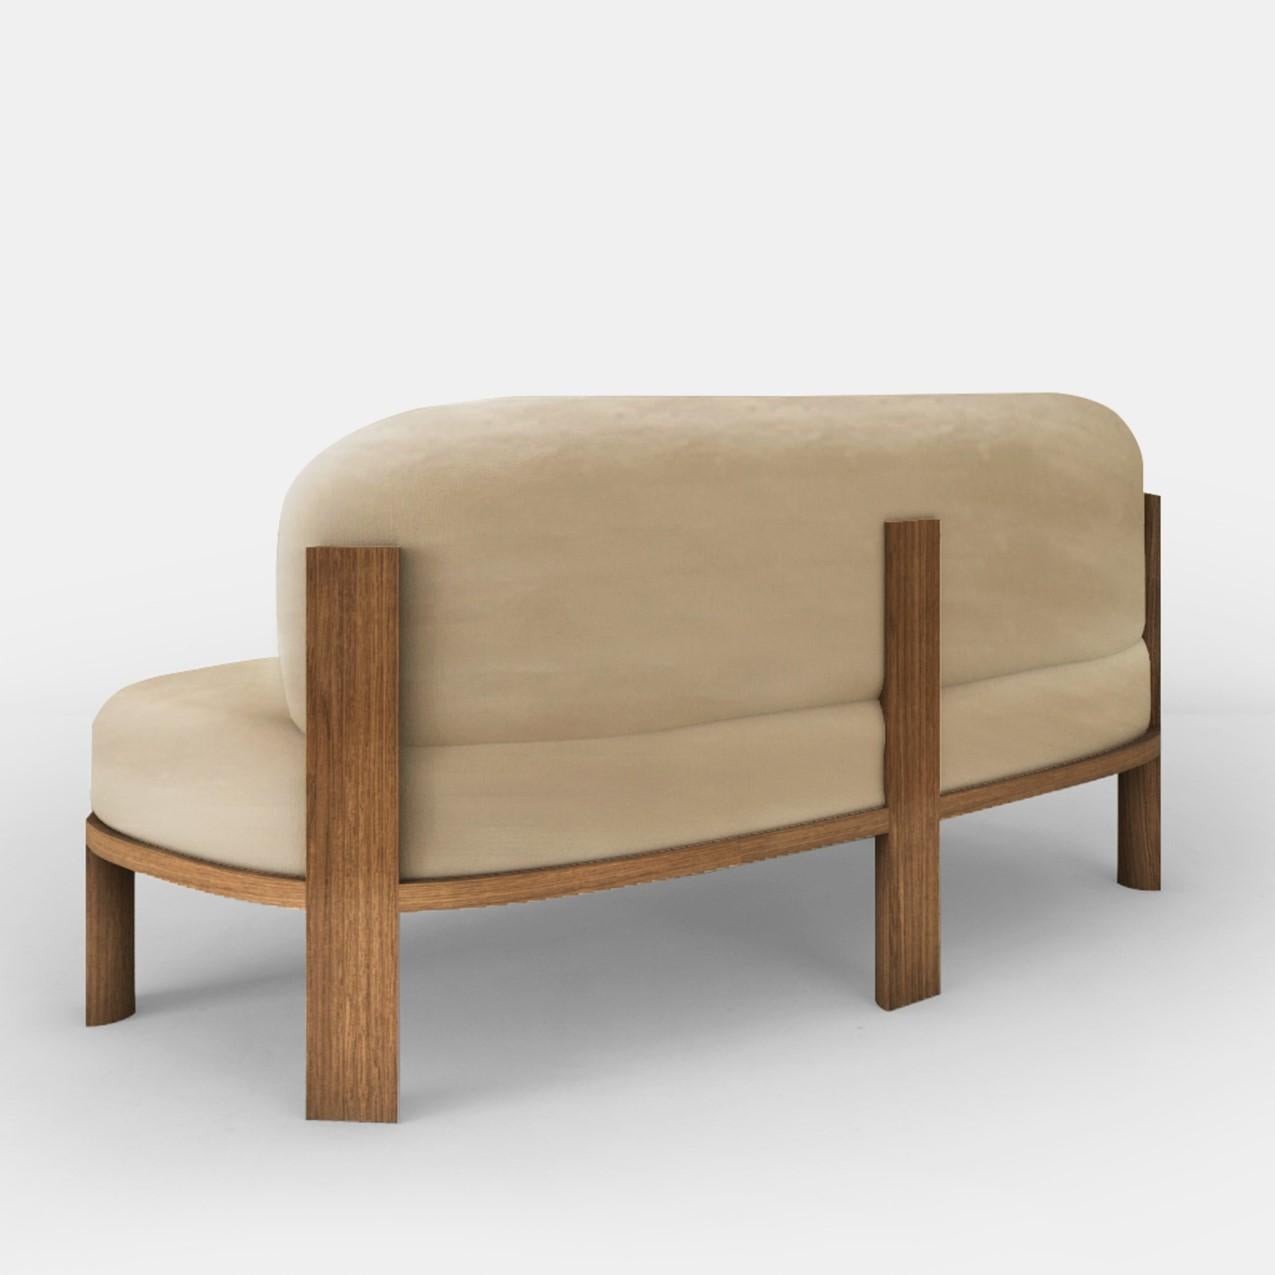 Unique Oak Sofa by Collector
Dimensions: W 140 x D 81 x H 70 cm
Materials: Fabric, Walnut Wood 
Other materials available. Please contact us.

The Collector brand aims to be part of the daily life by fusing furniture to our home routine and